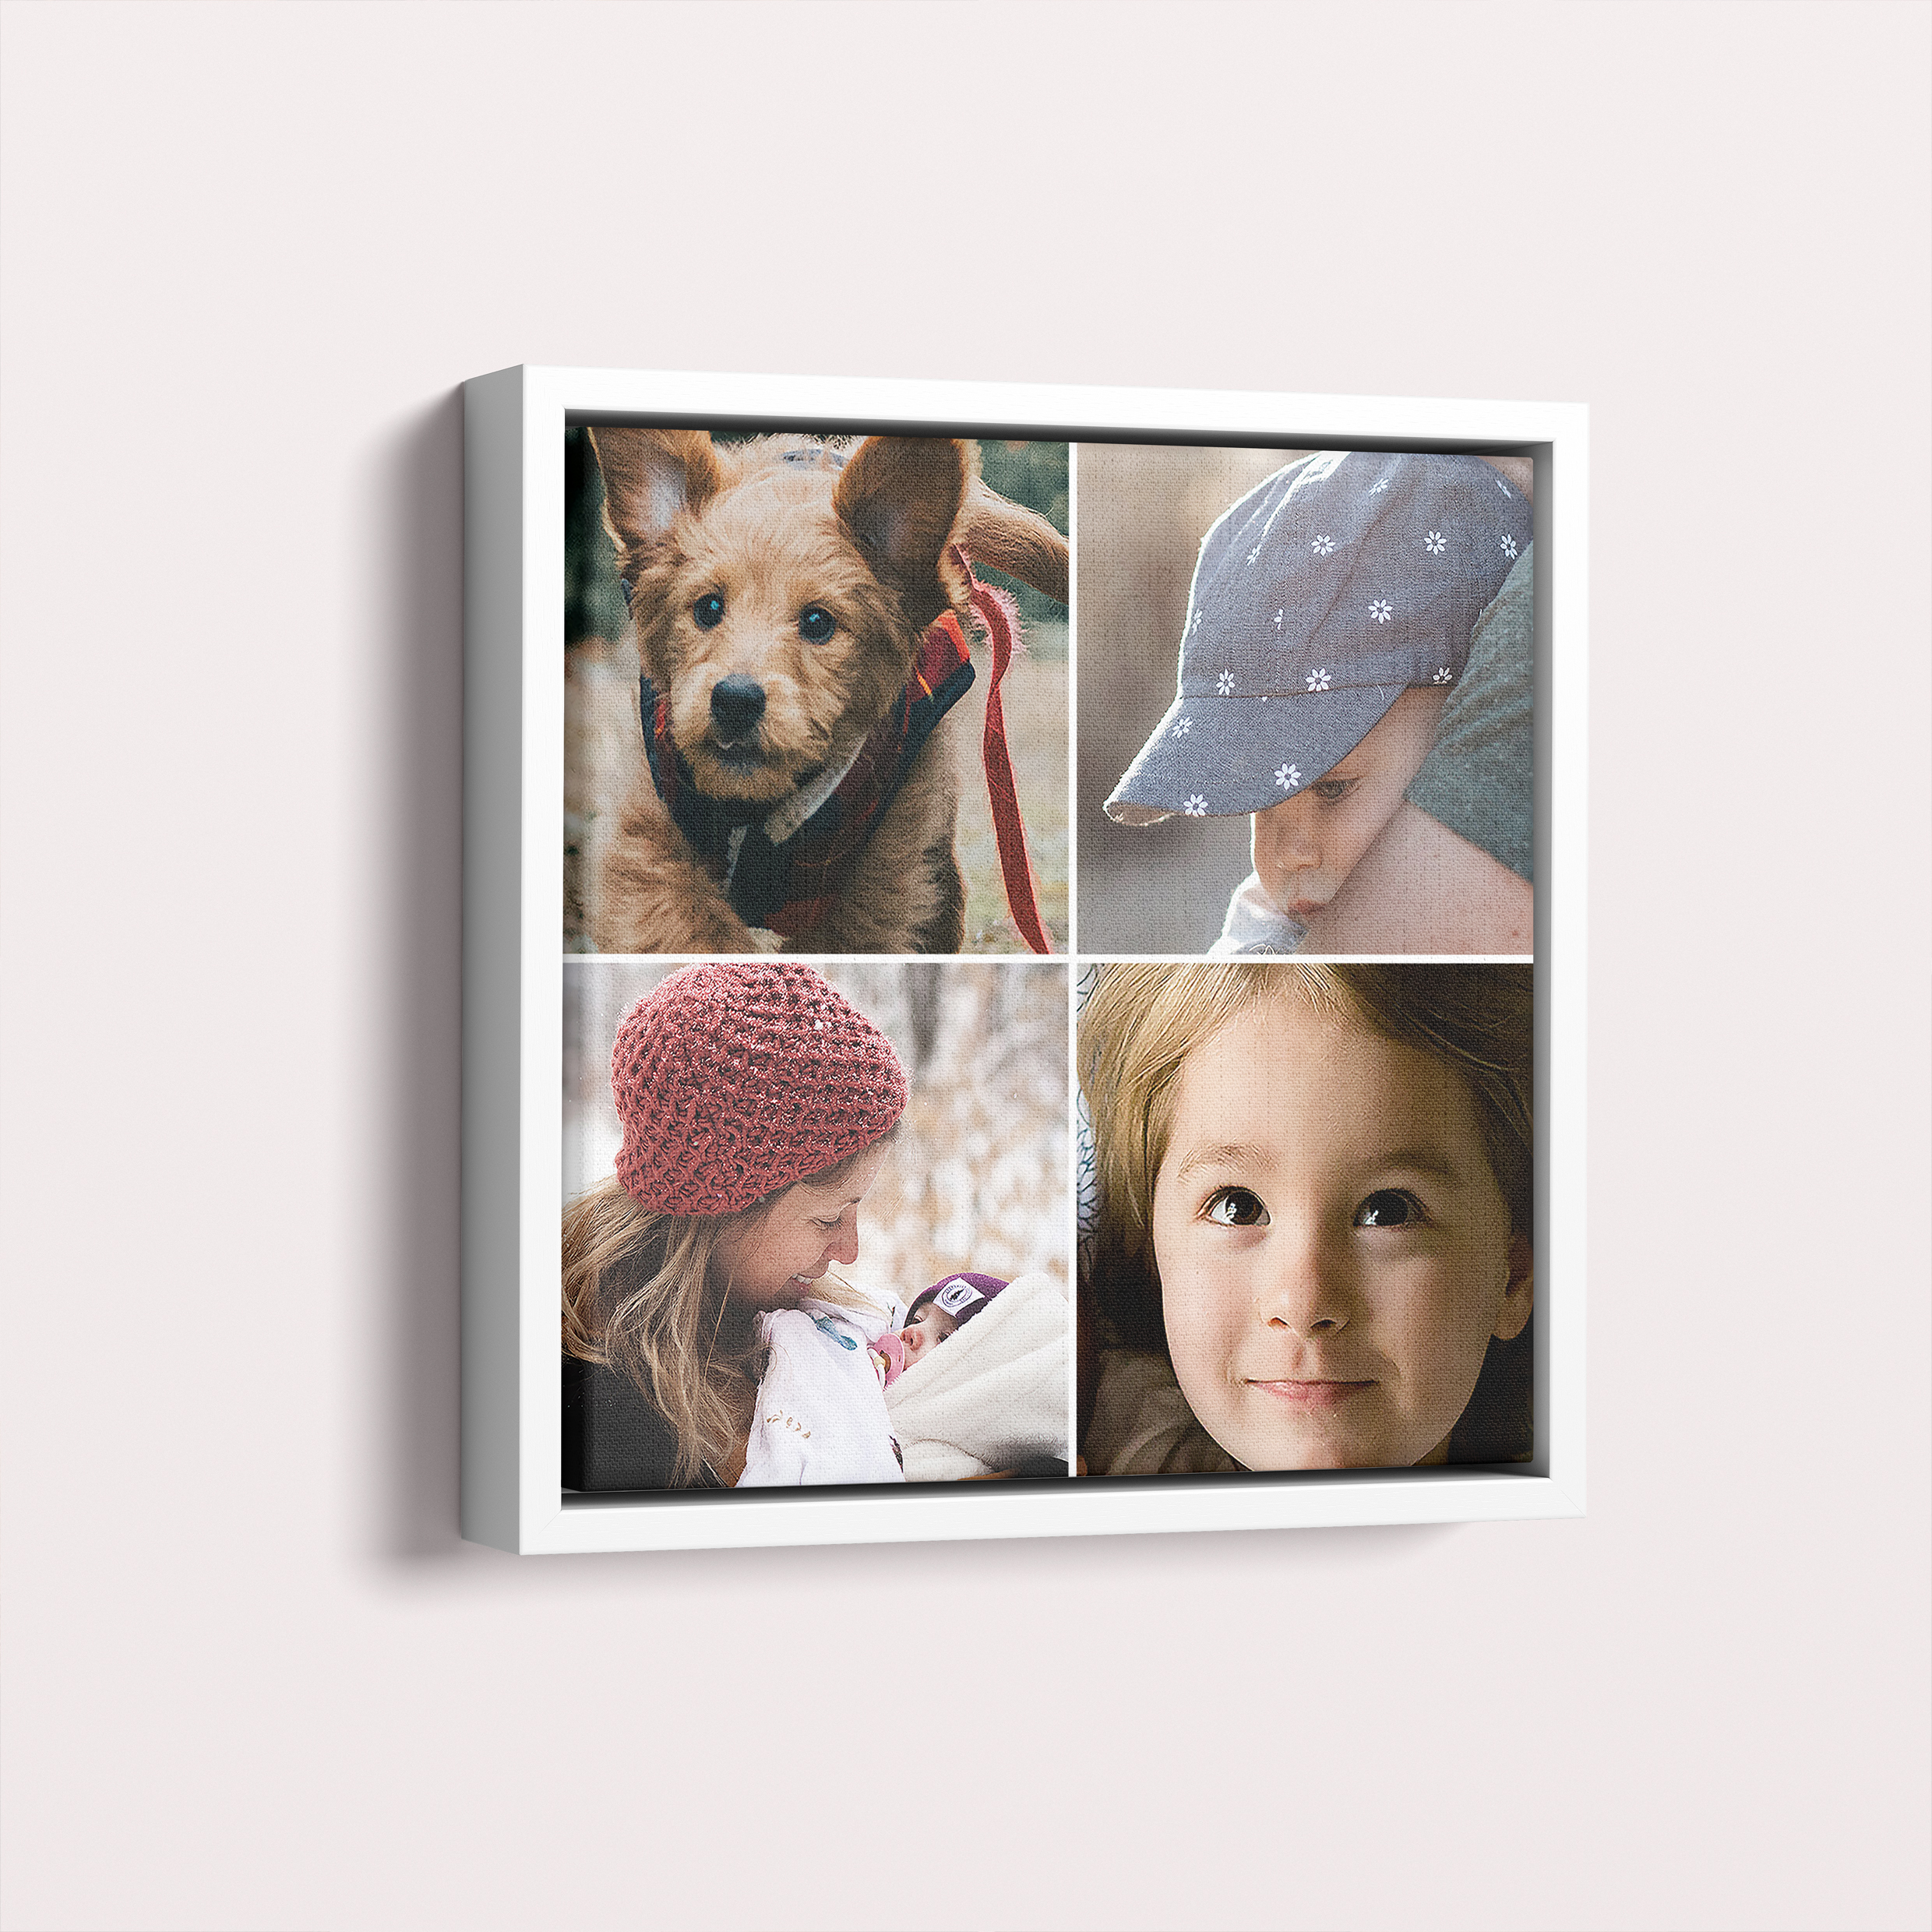  Personalized Quad Framed Photo Canvas - Relive nostalgia with this portrait-oriented canvas designed to showcase four cherished photos.